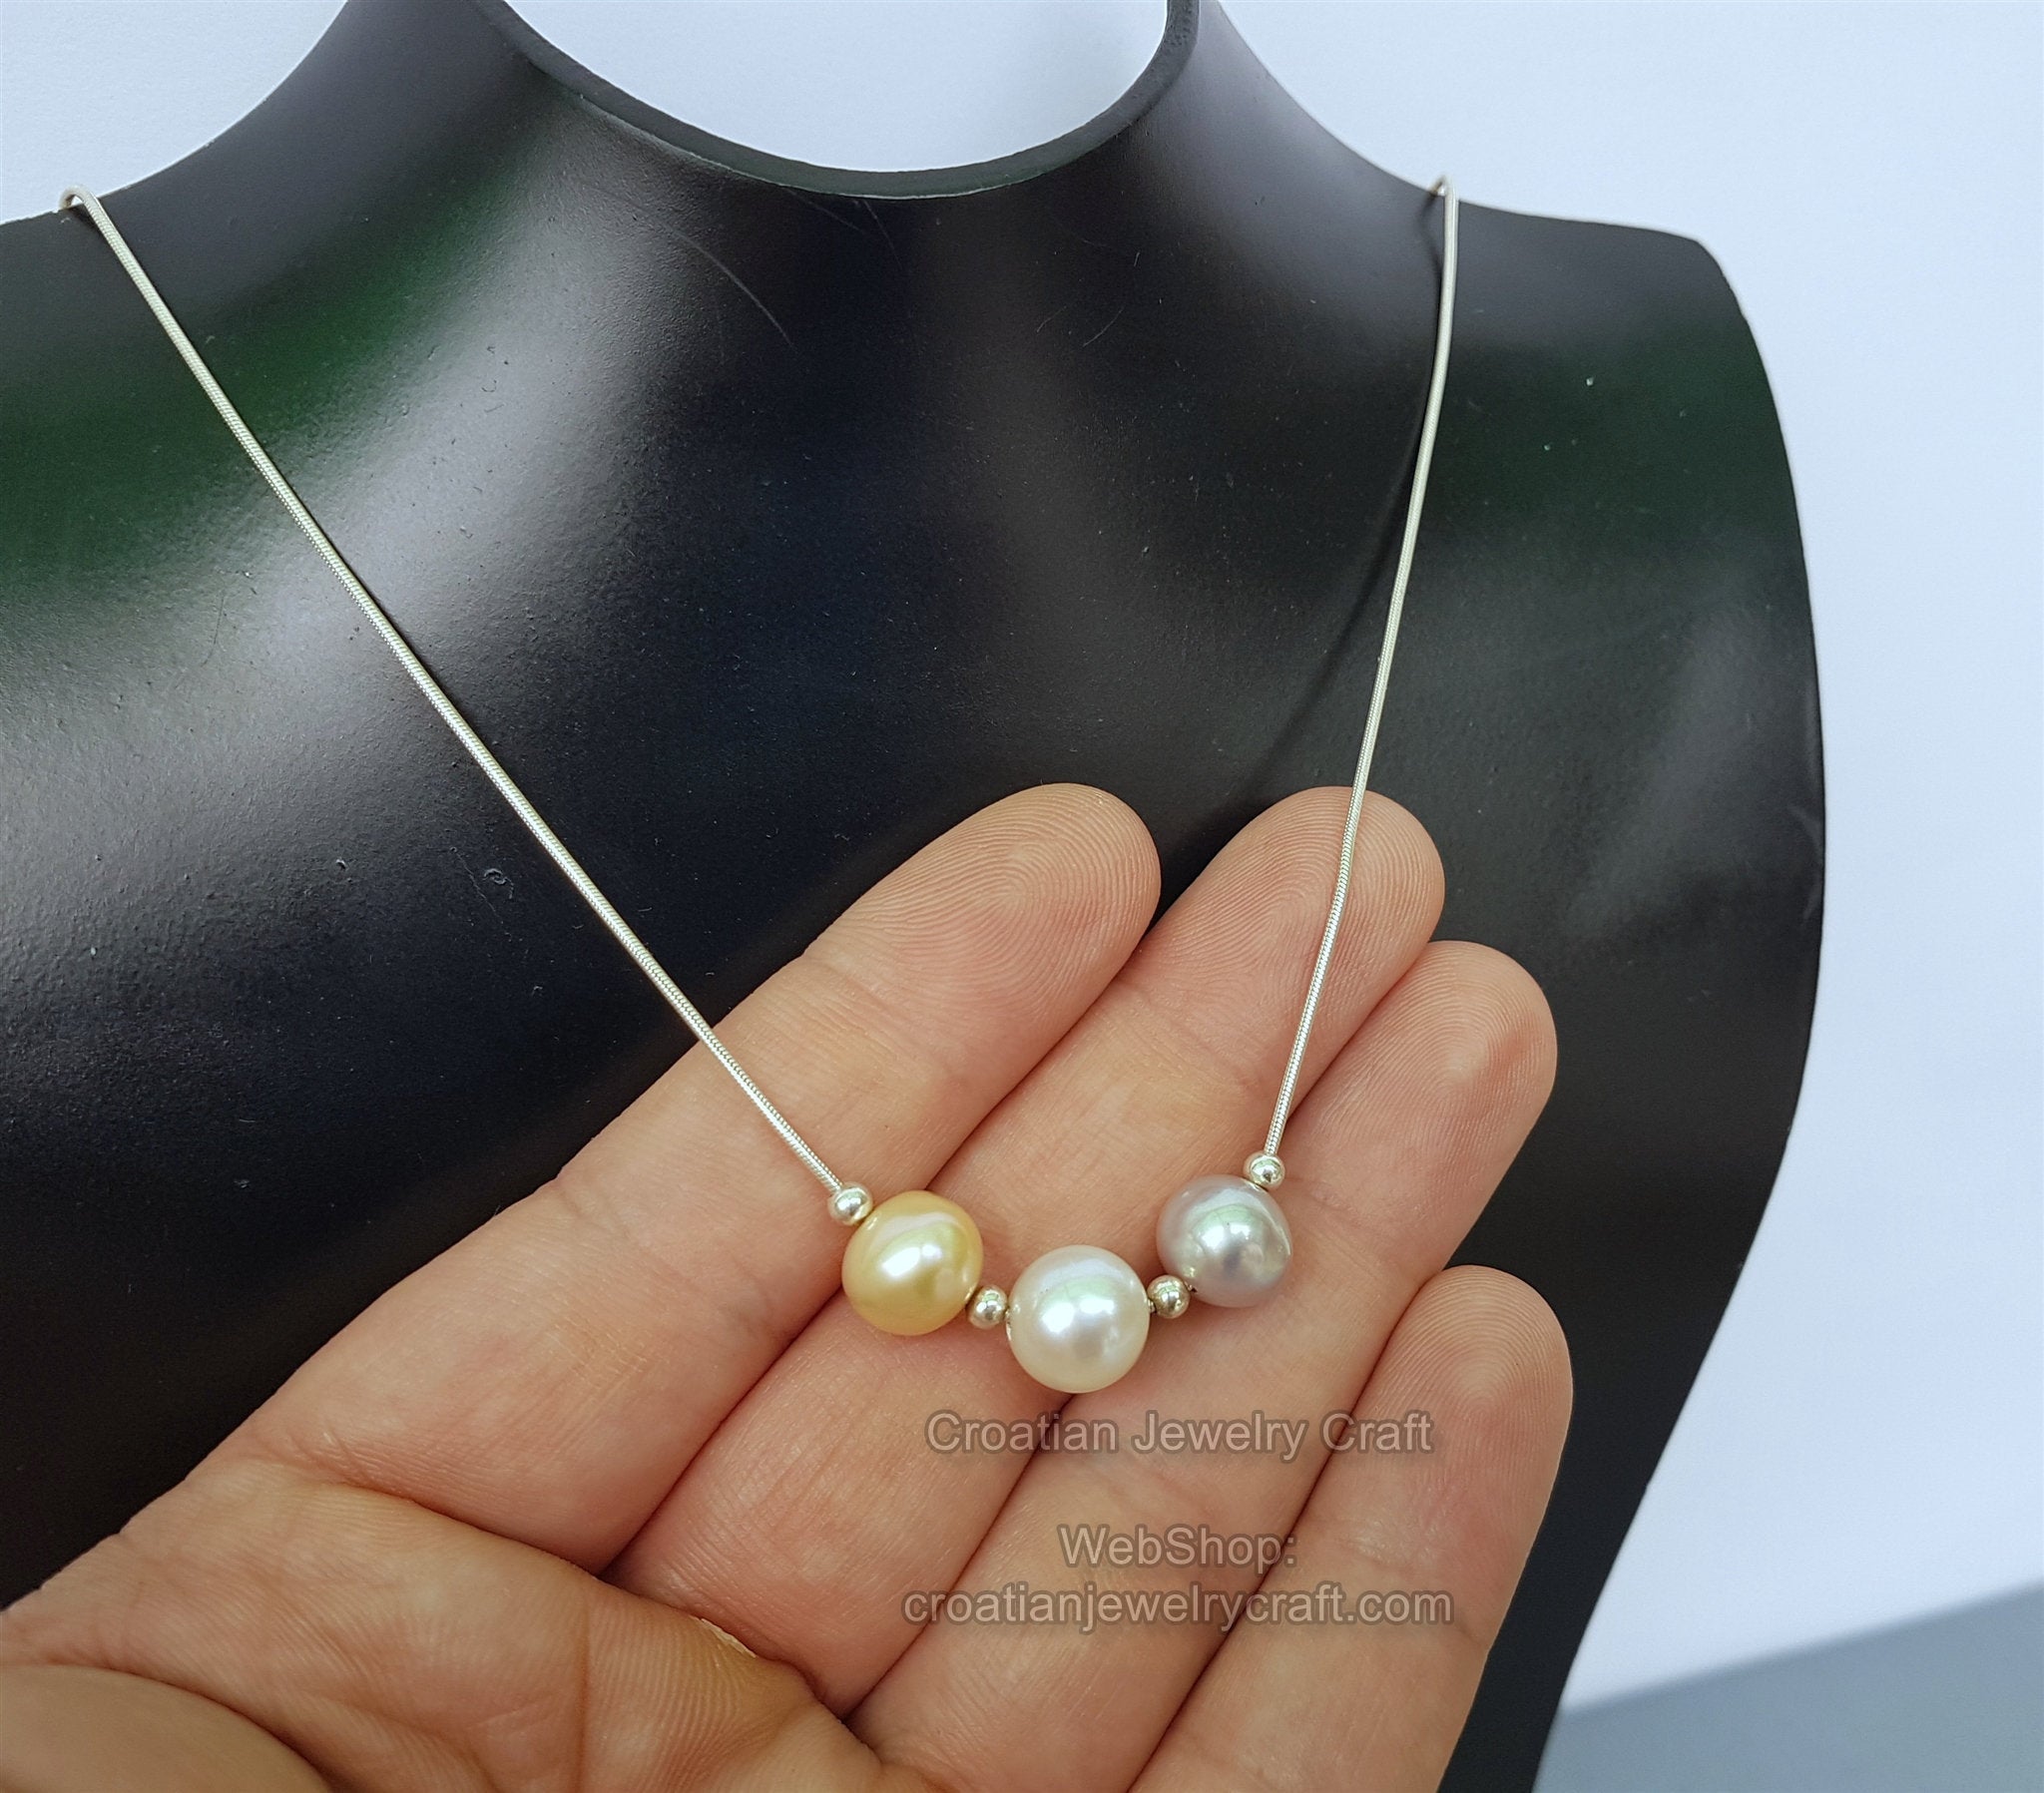 Gold Single Pearl 14K 18K Gold Chain Necklace, Floating Pearl Necklace, 9 mm Simple Freshwater Pearl Gold Necklace Is A Great Gift for Women June